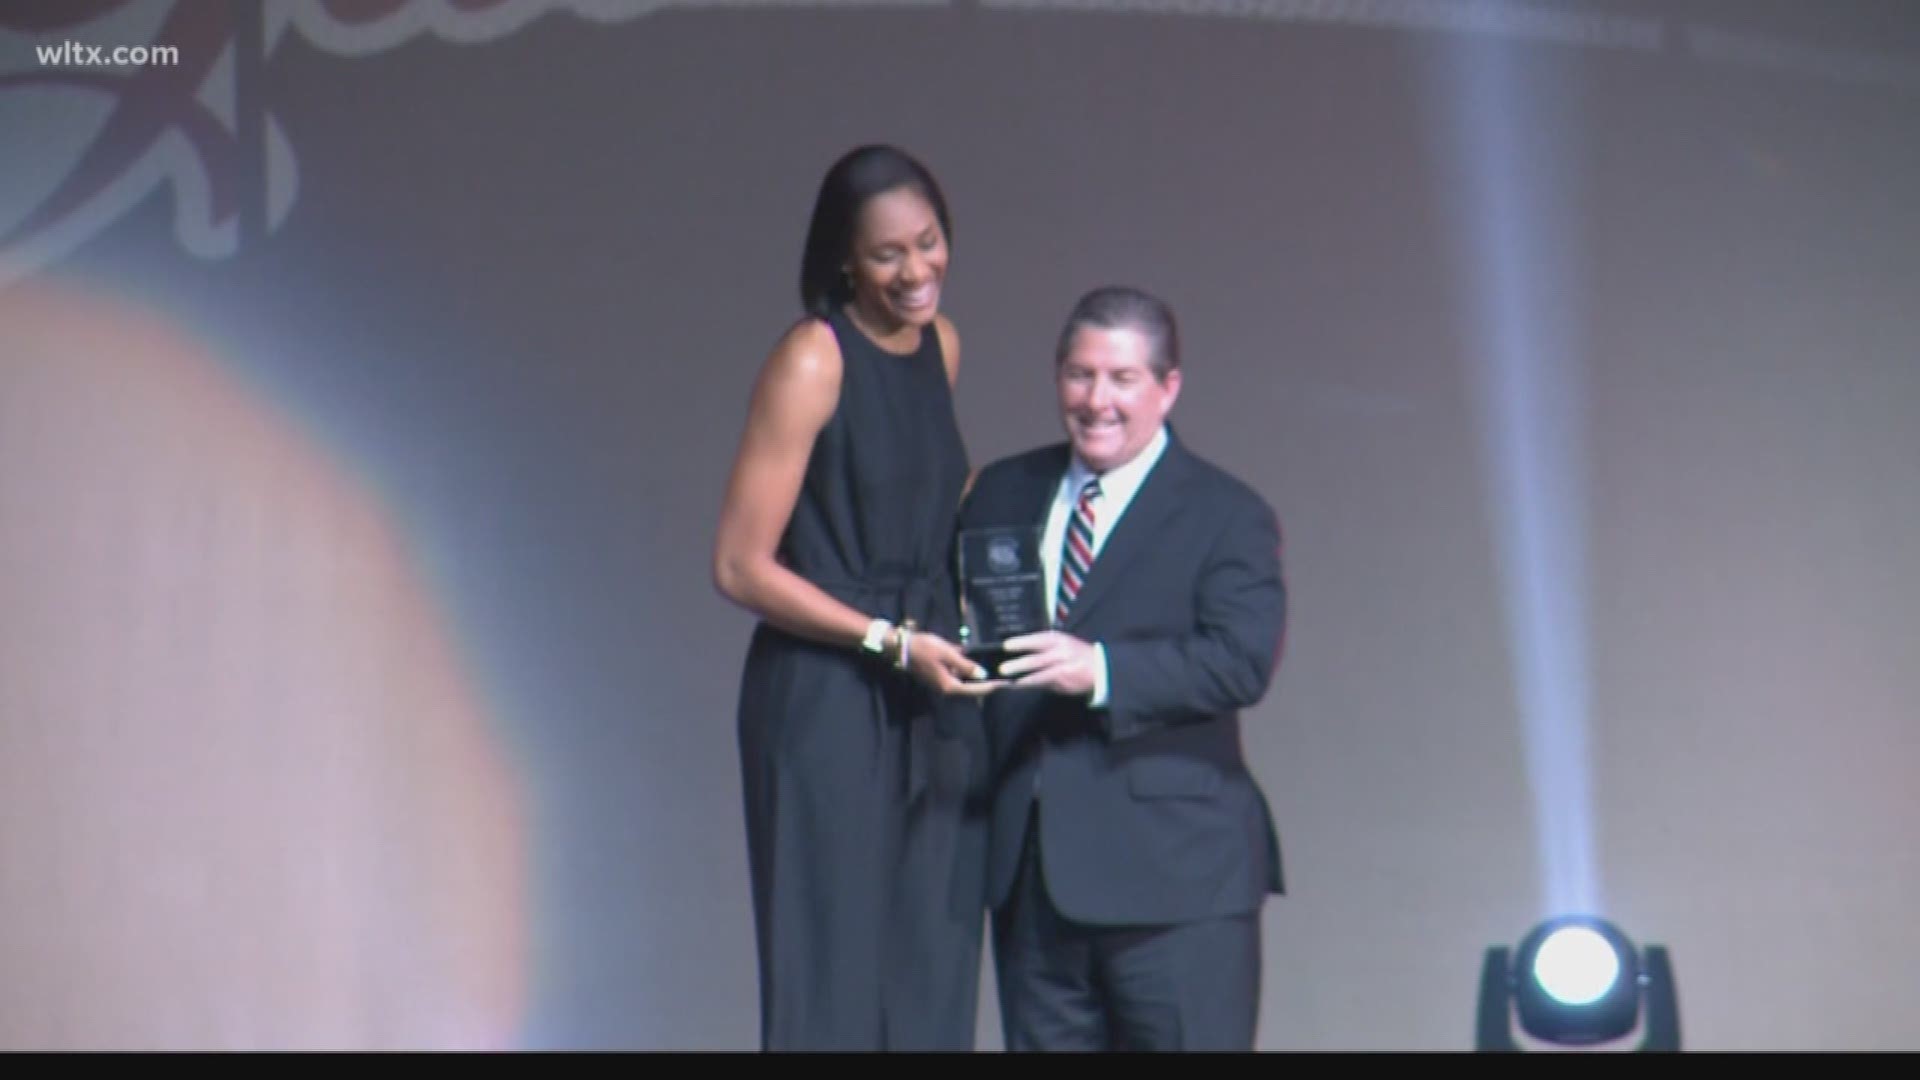 The first draft pick in the history of the Las Vegas Aces franchise was honored Monday night at the Gamecock Gala. A'ja Wilson was named team MVP, Female Athlete of the Year and the winner of the President's Award.